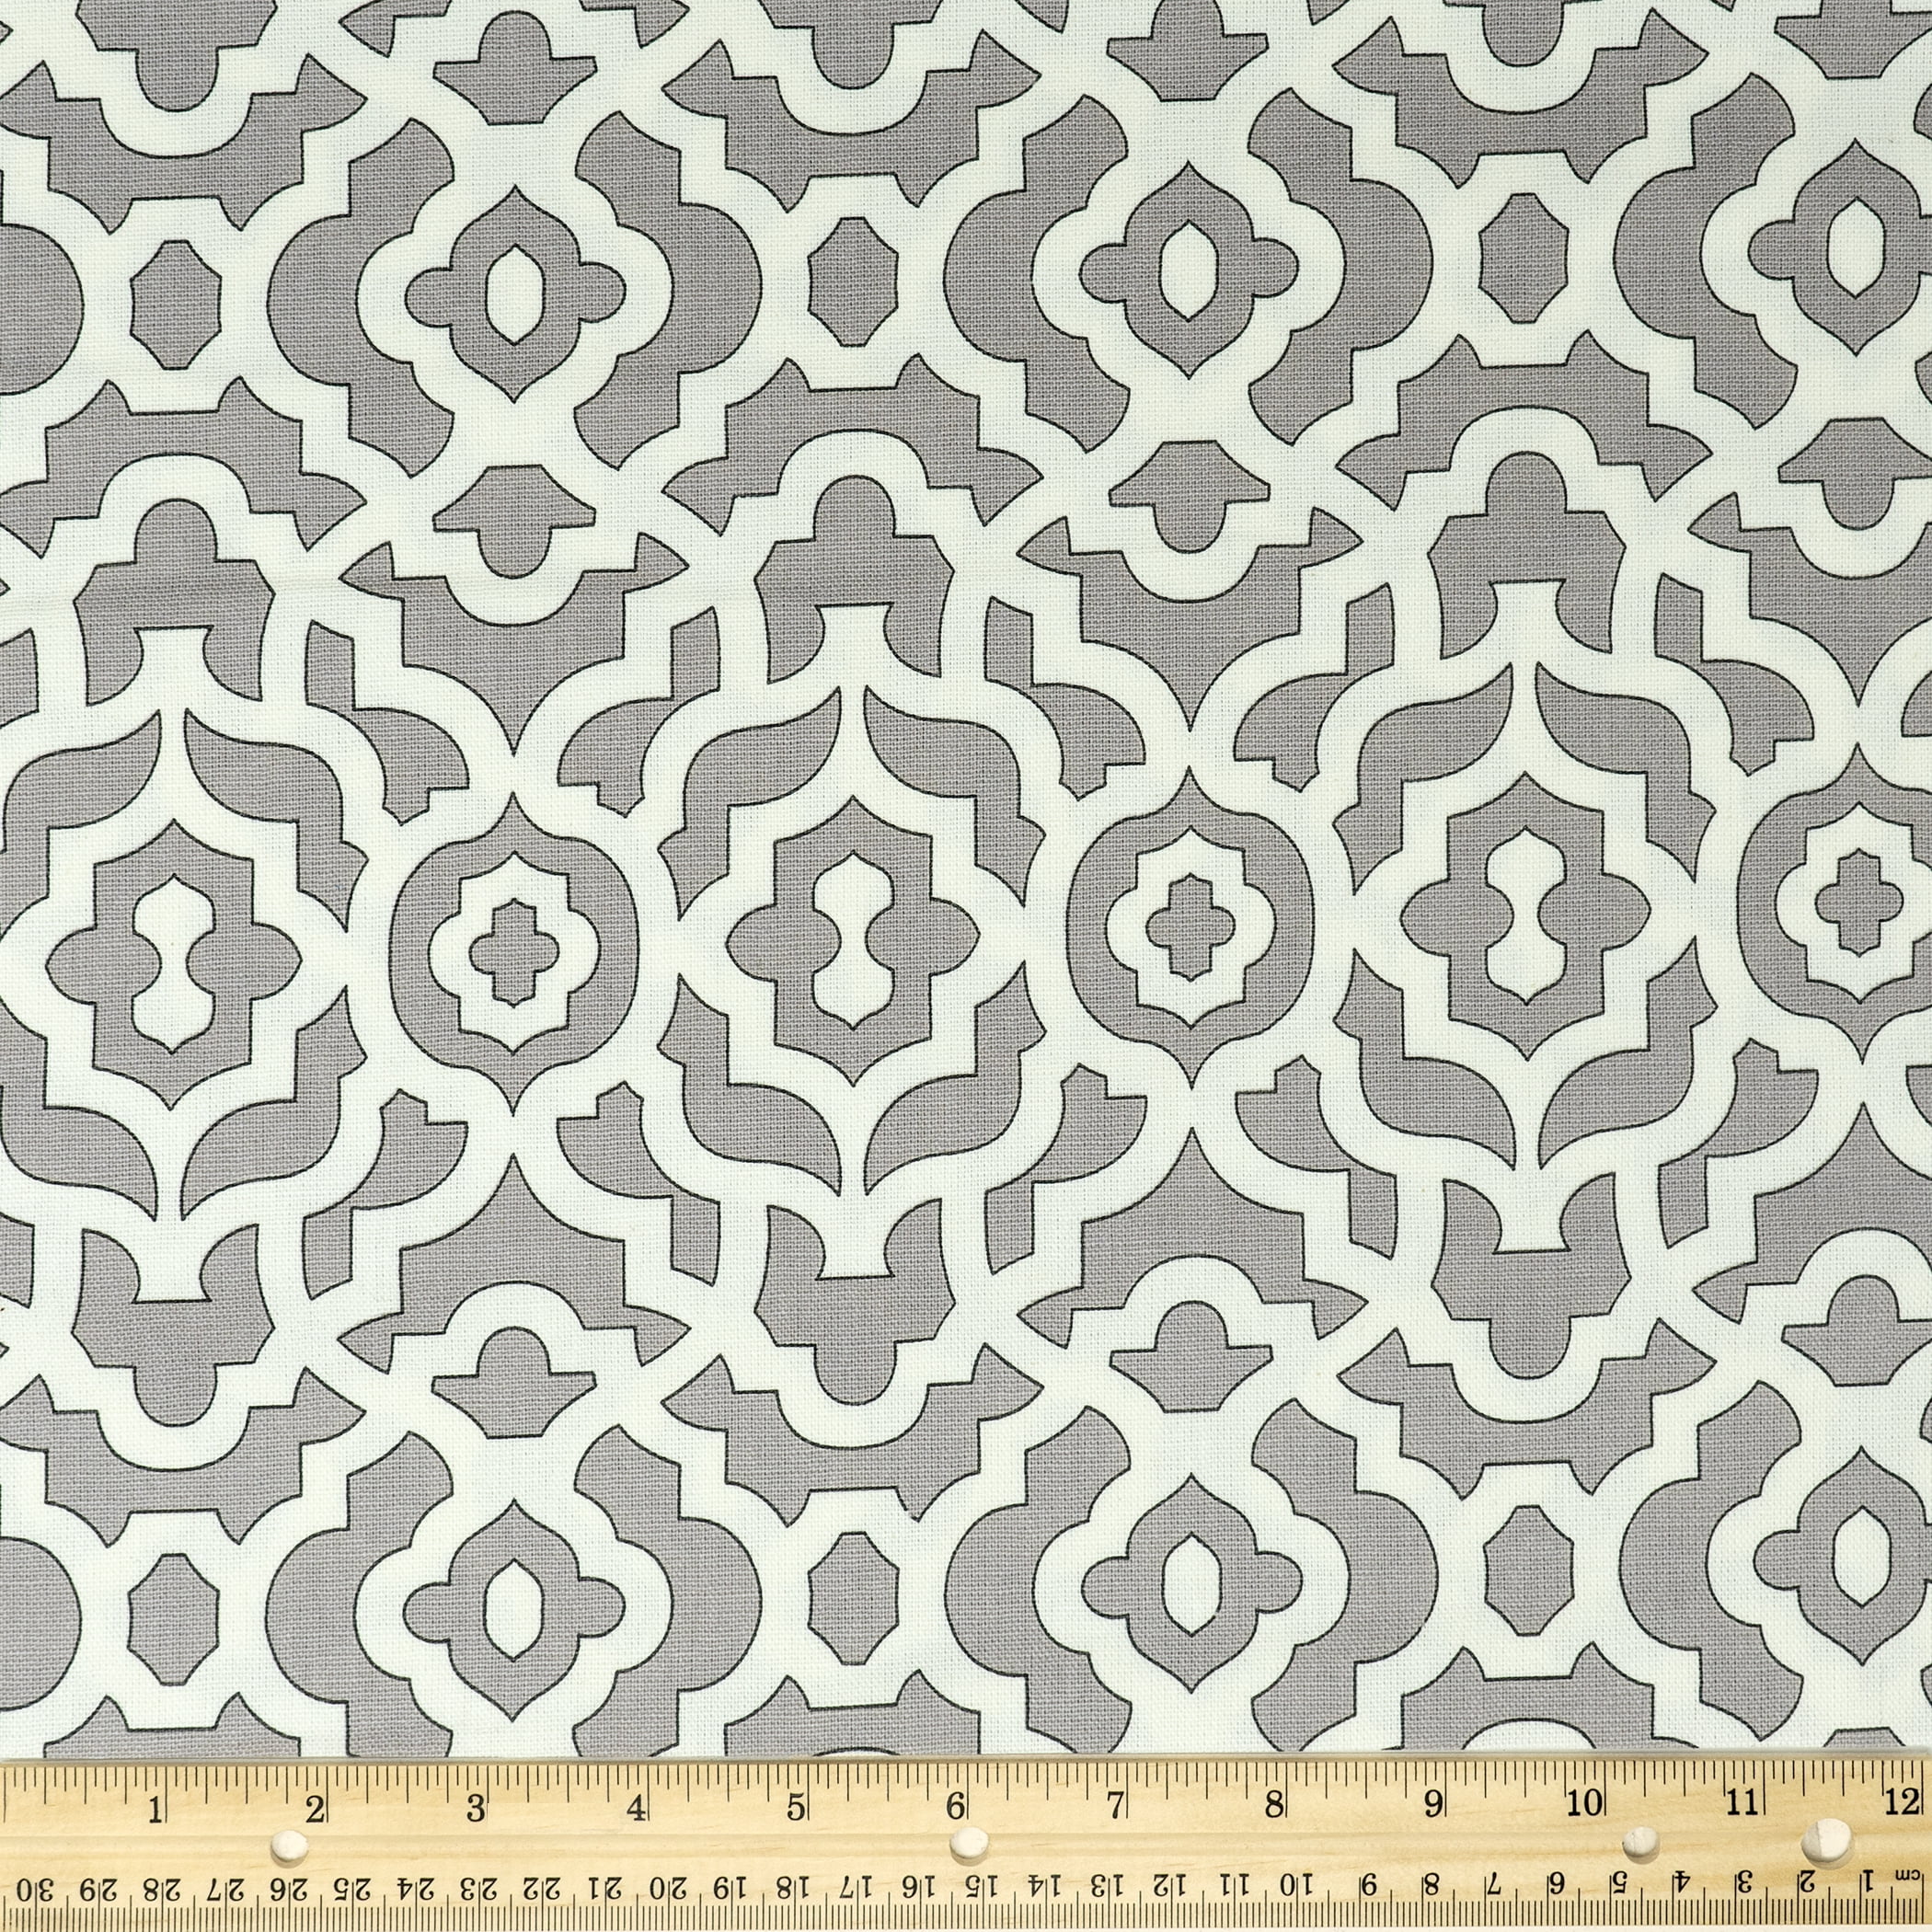 Waverly Inspirations 100% Cotton Duck 54 inch Texture Dark Grey Color Sewing Fabric by The Yard